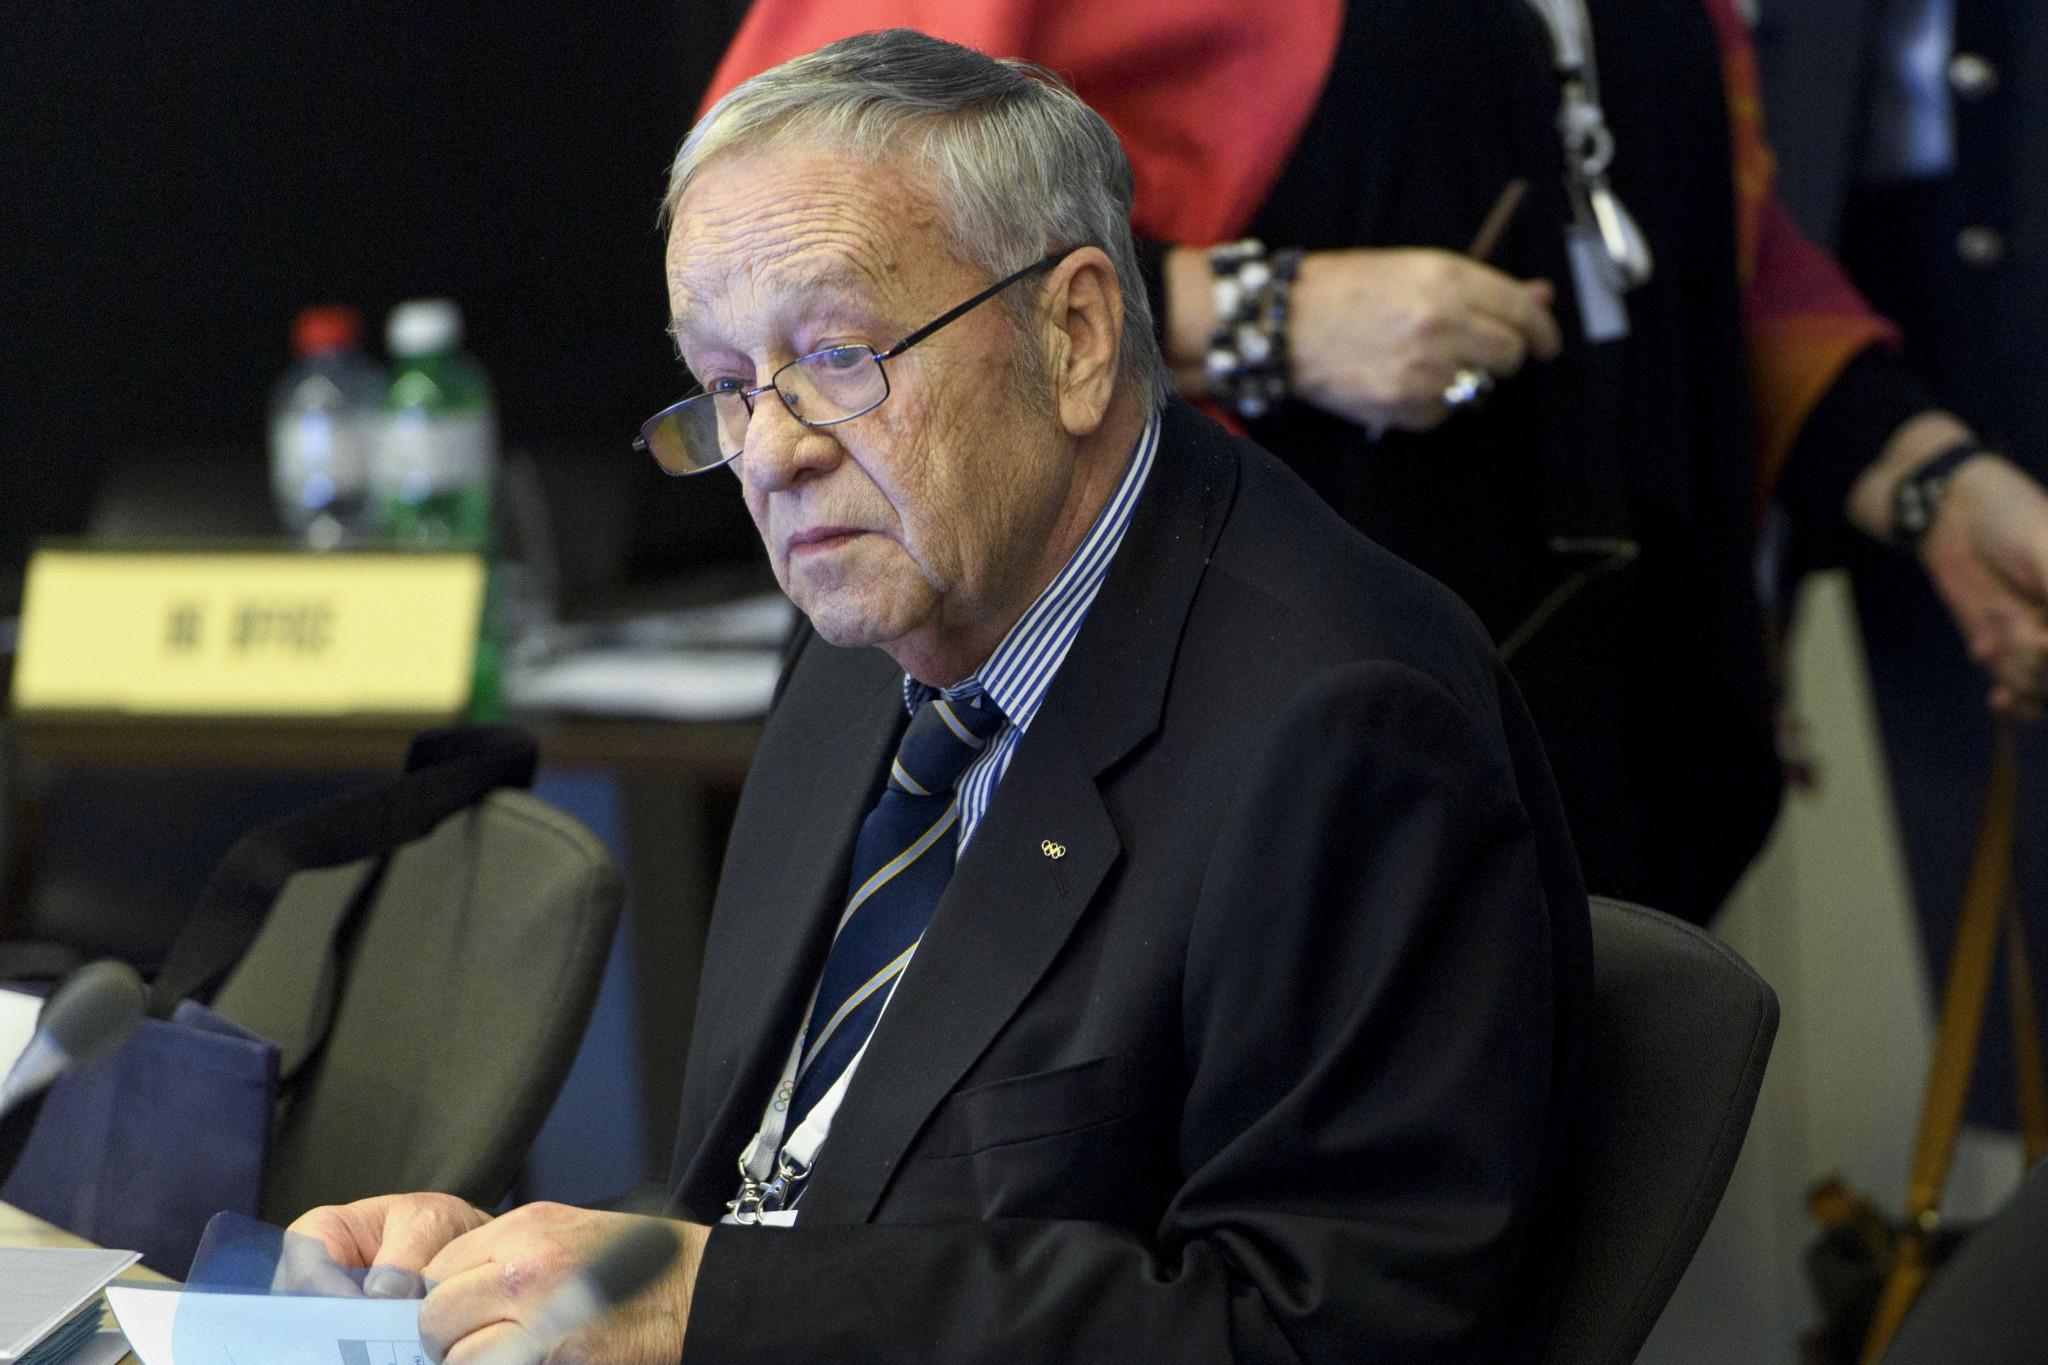 Gian-Franco Kasper has been re-elected for a sixth team at FIS President ©Getty Images